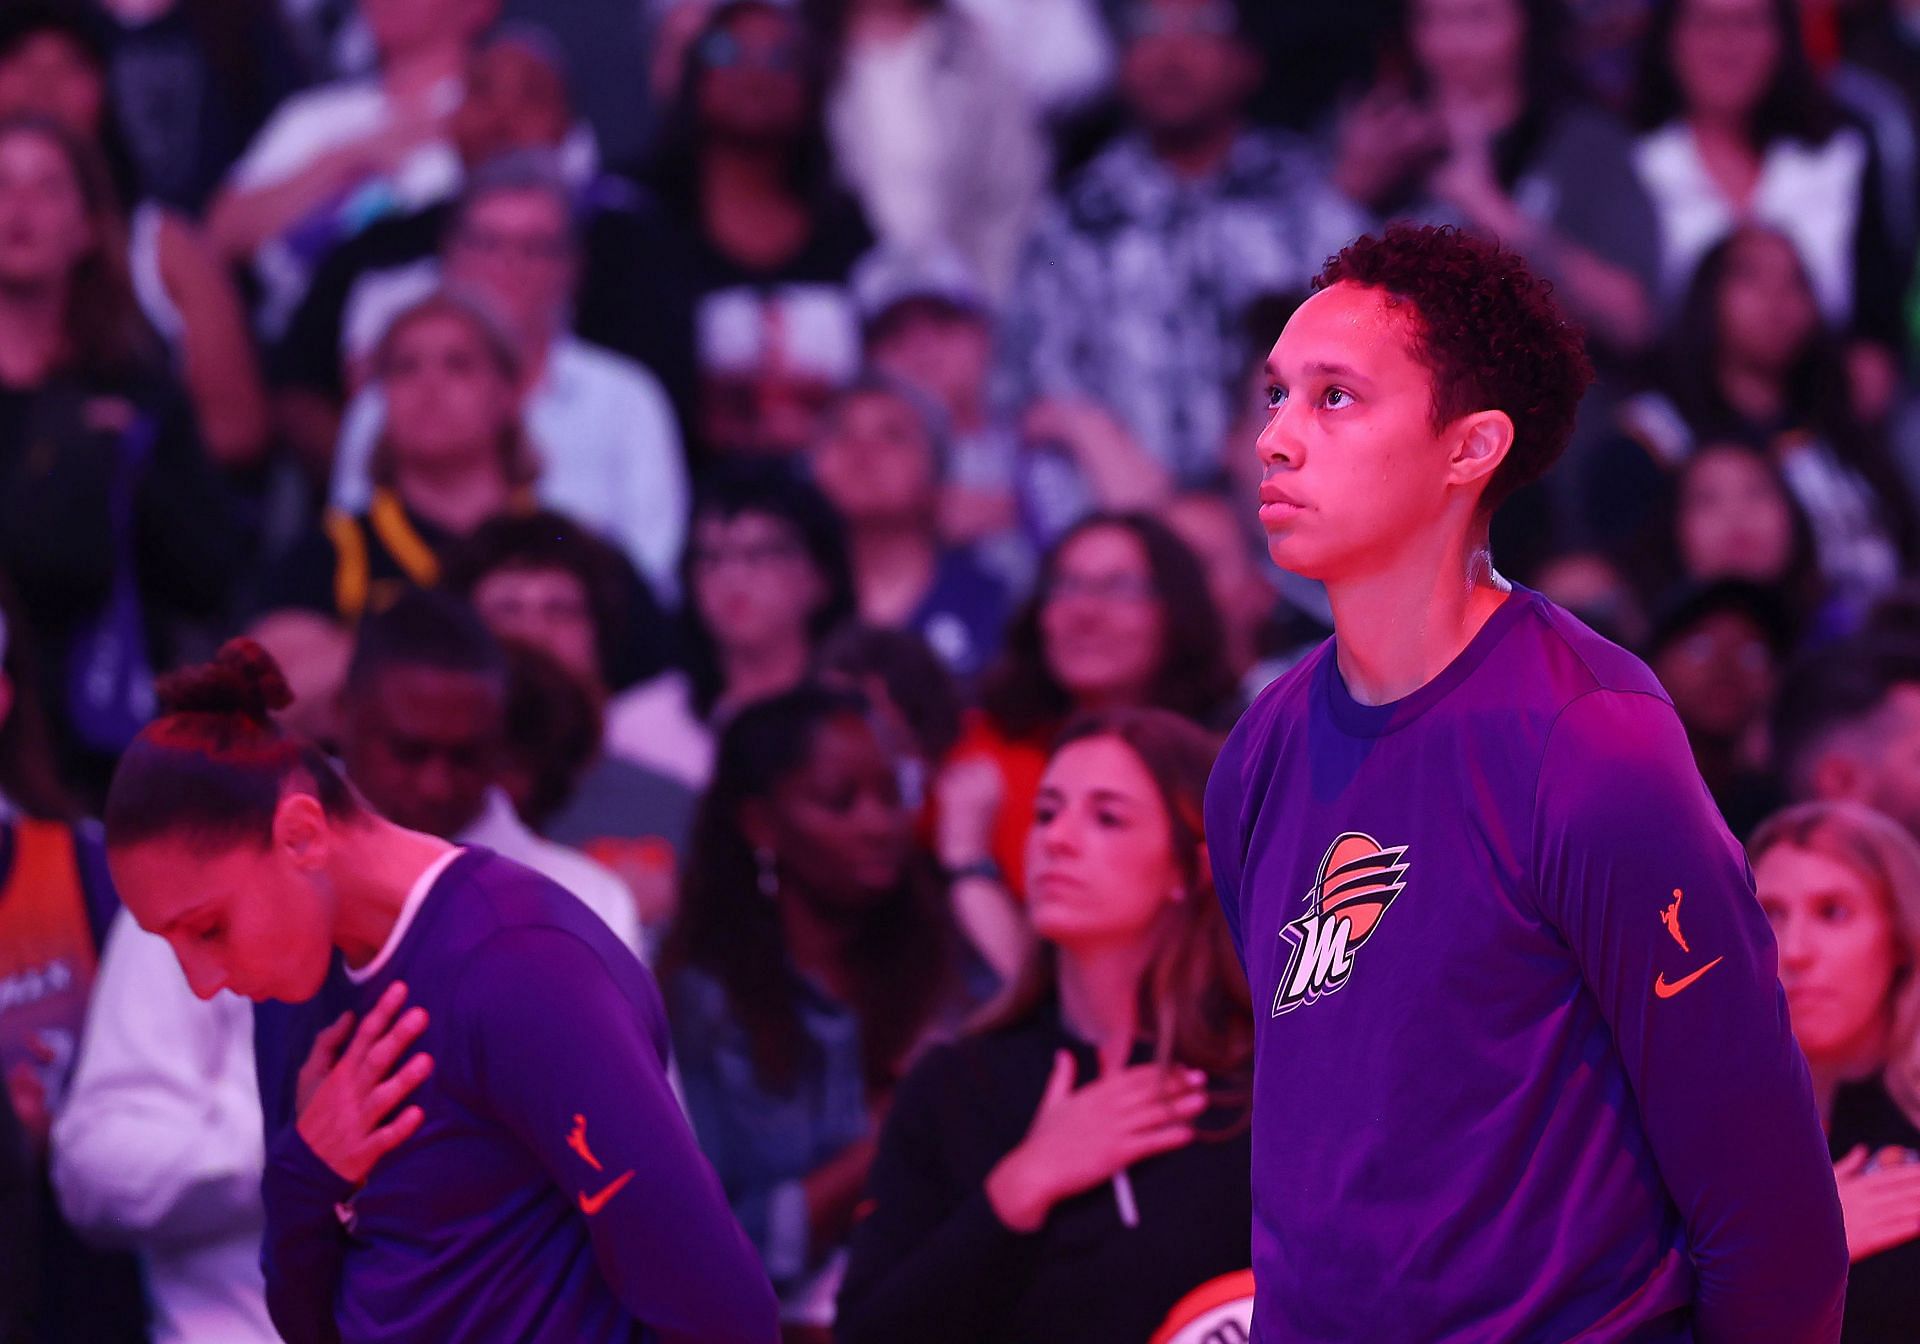 Brittney Griner, Mercury Teammates Confronted At Airport By